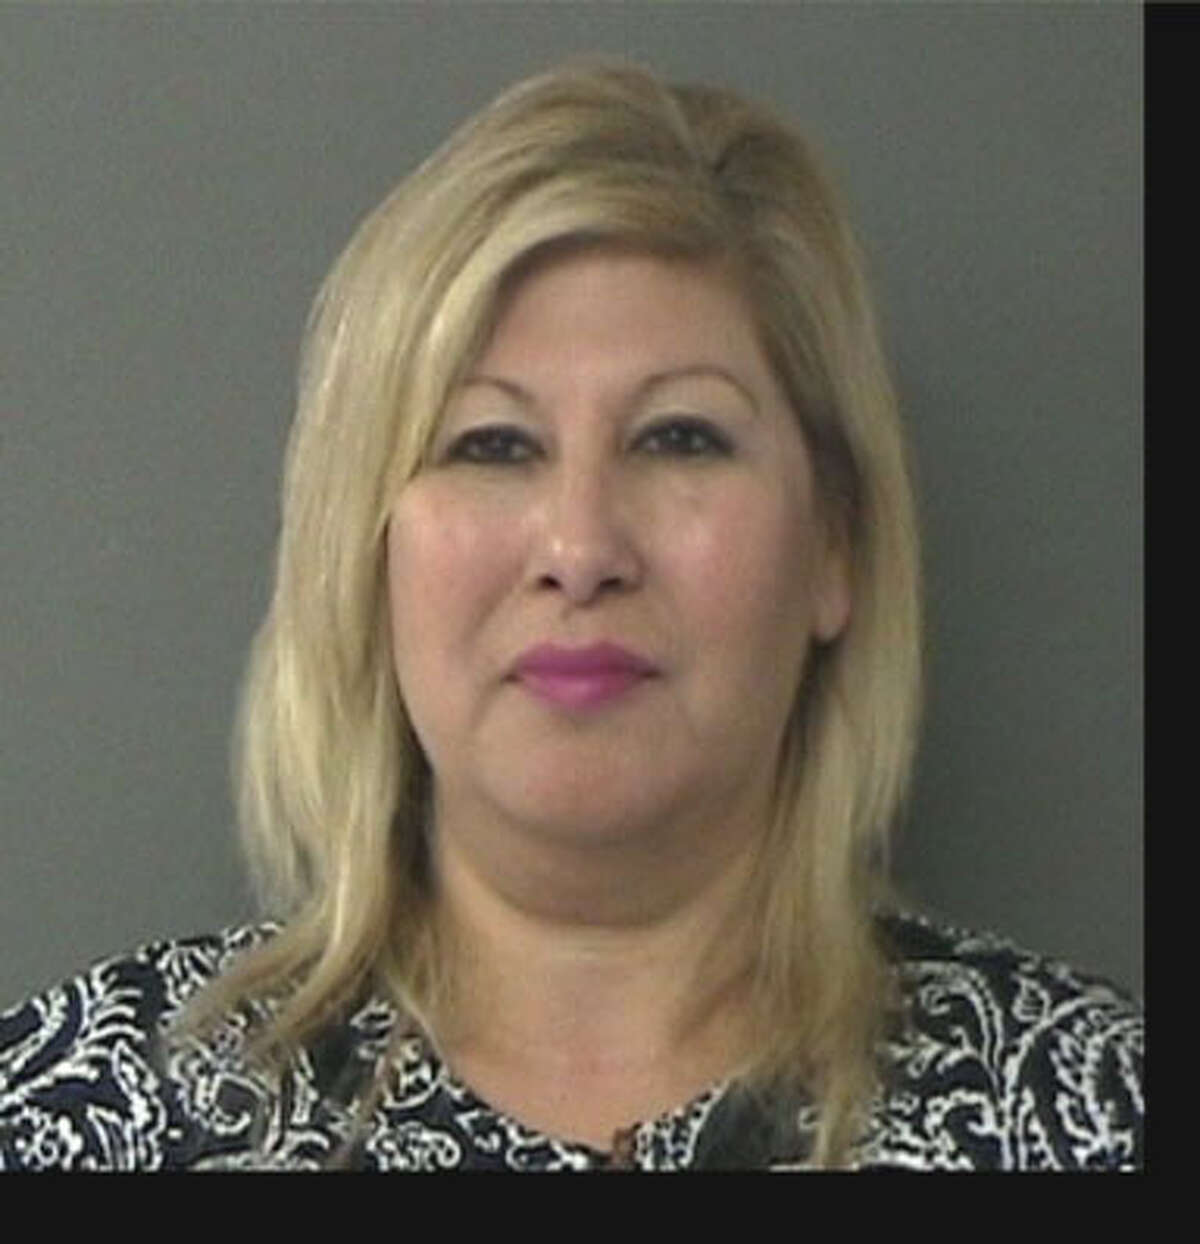 Delma Flores-Smith turned herself in at the Waller County Jail.